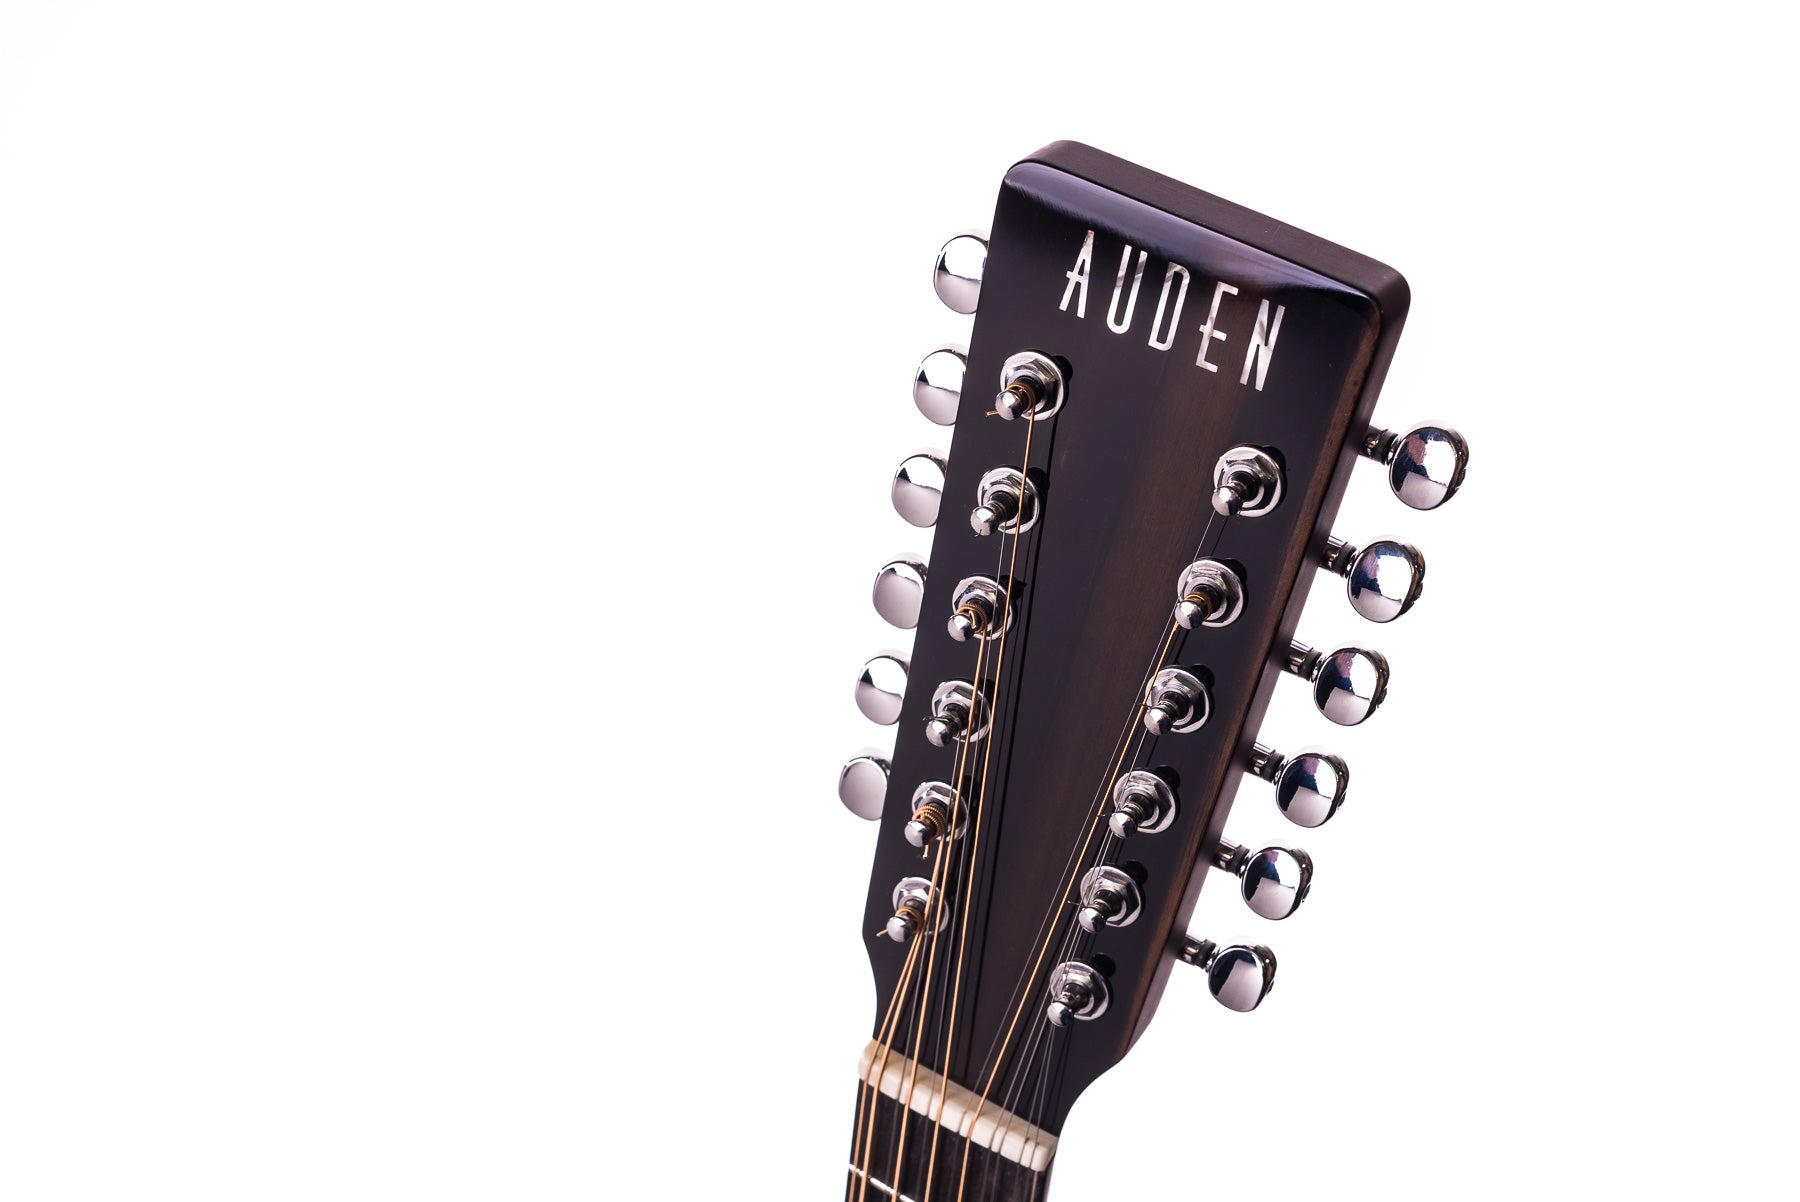 AUDEN MAHOGANY SERIES – AUSTIN SPRUCE FULL BODY 12 STRING, Electro Acoustic Guitar for sale at Richards Guitars.